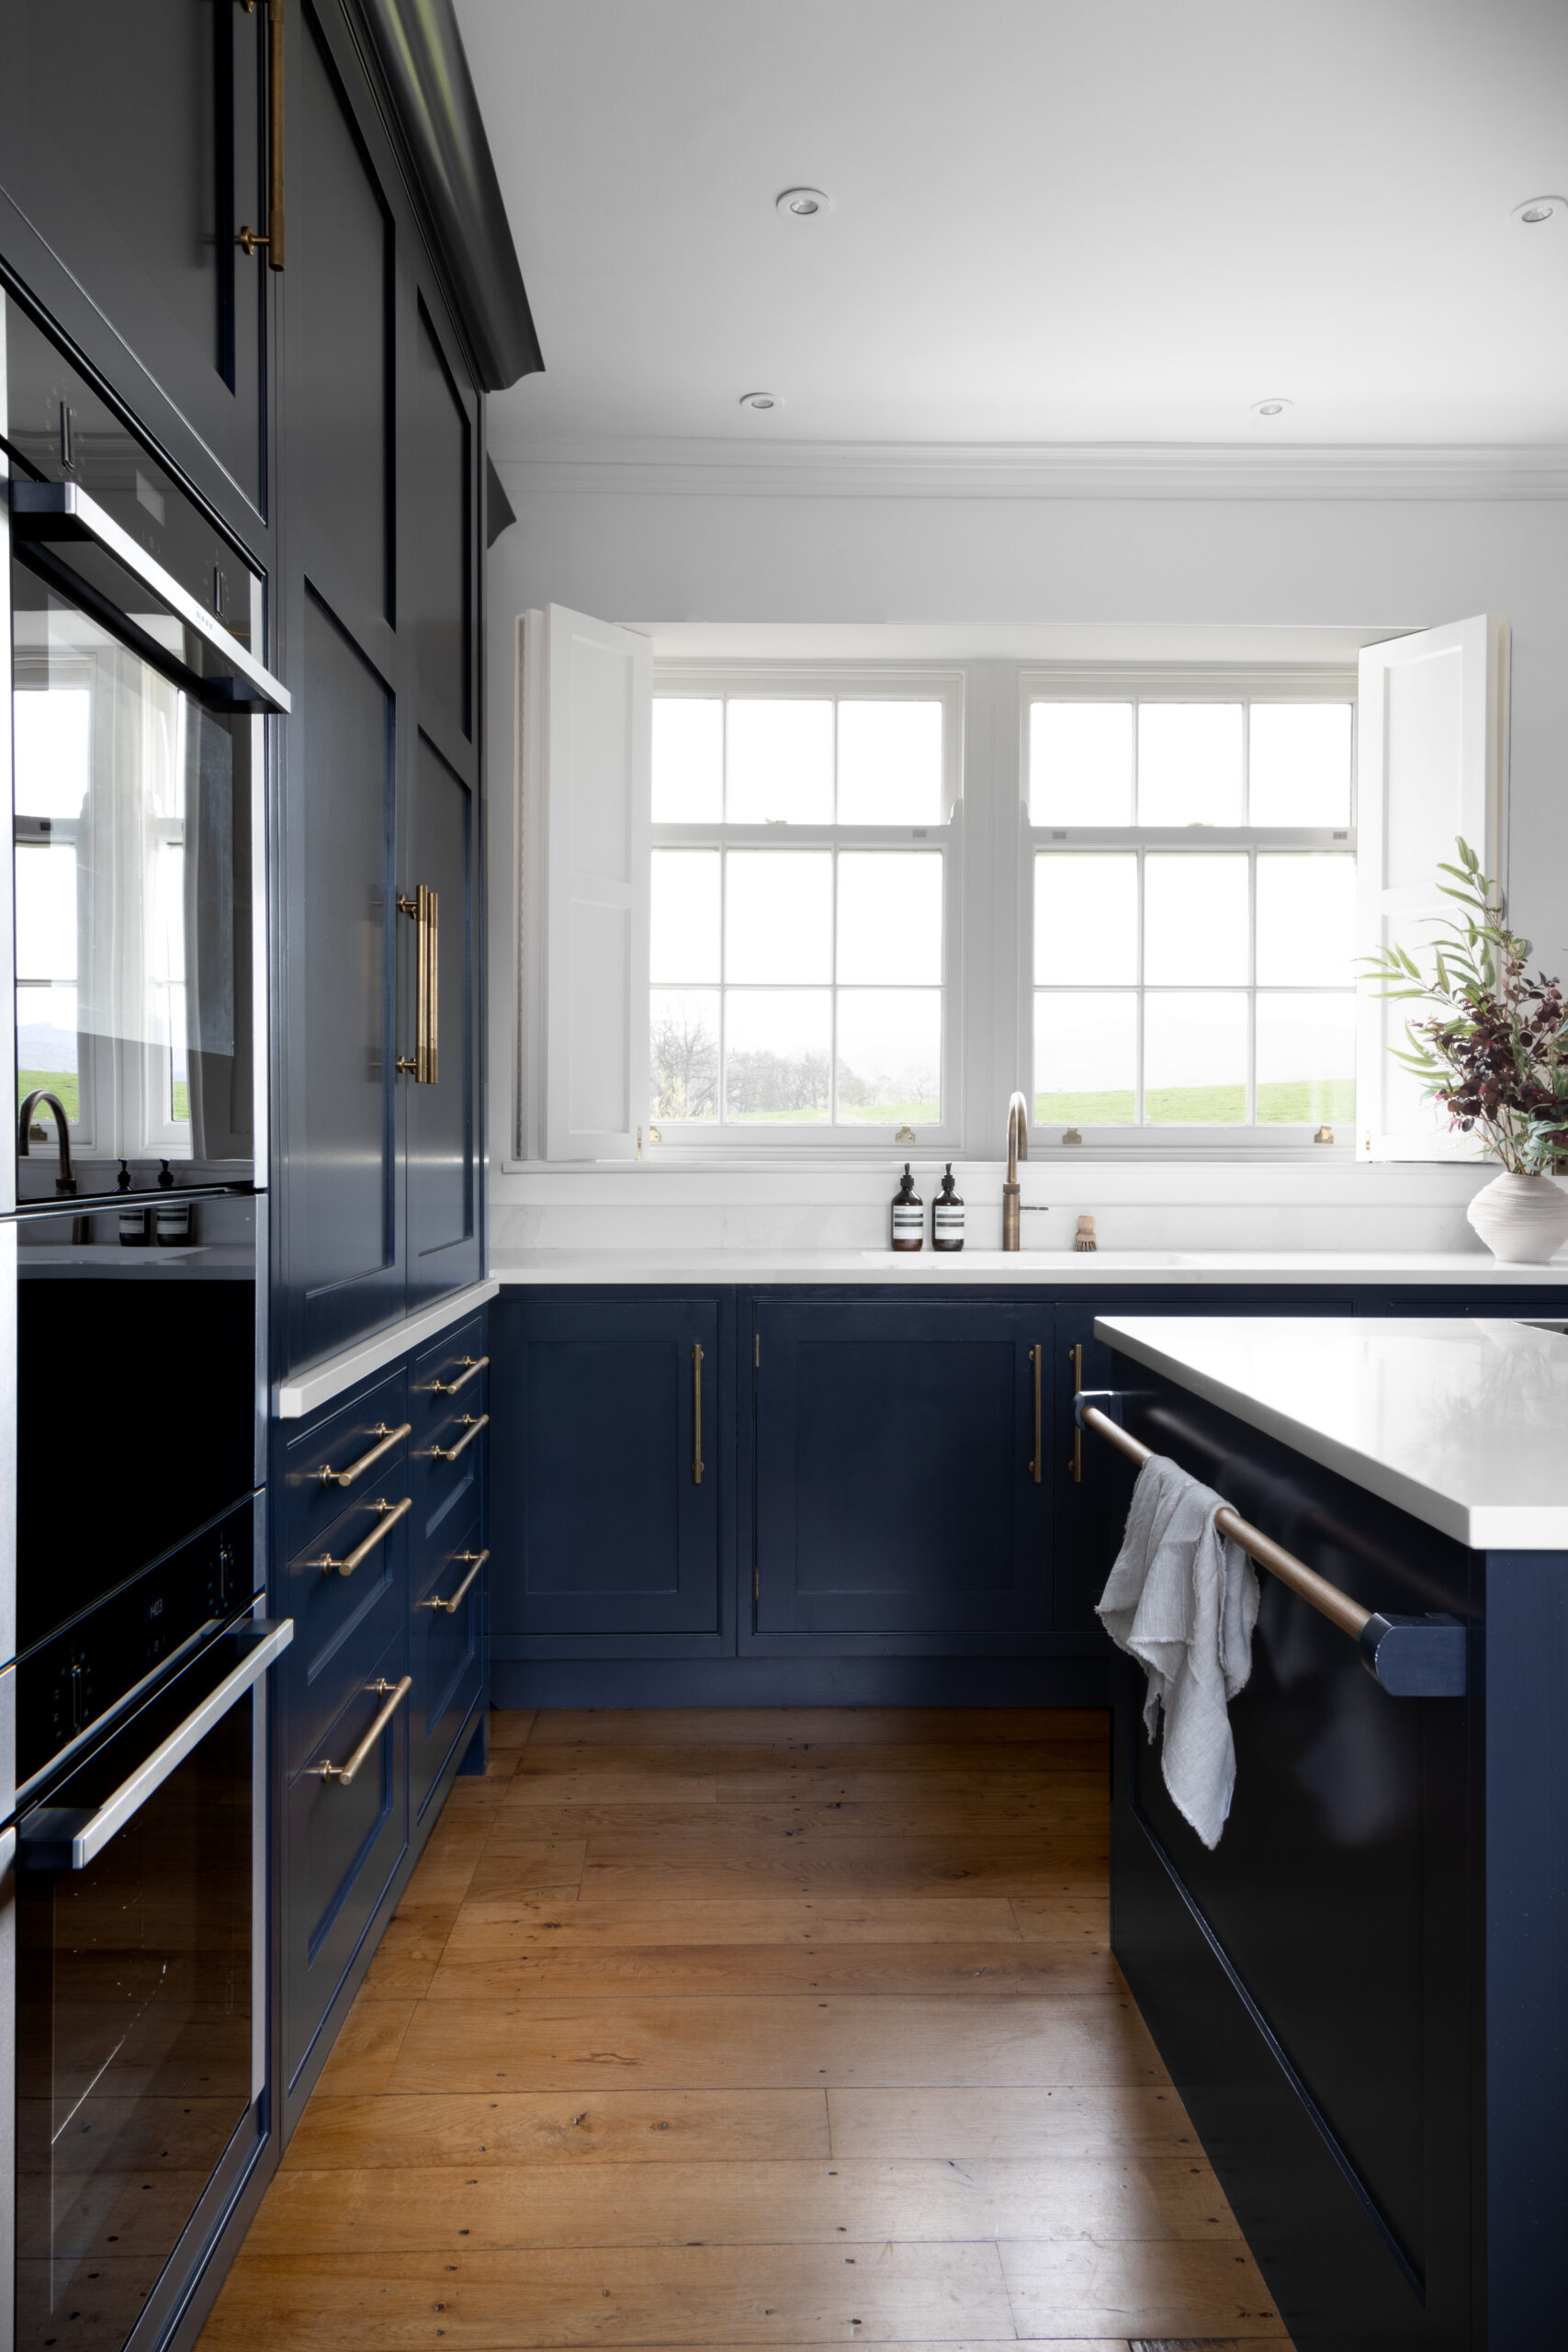 Kitchen residential interior design north wales, conwy